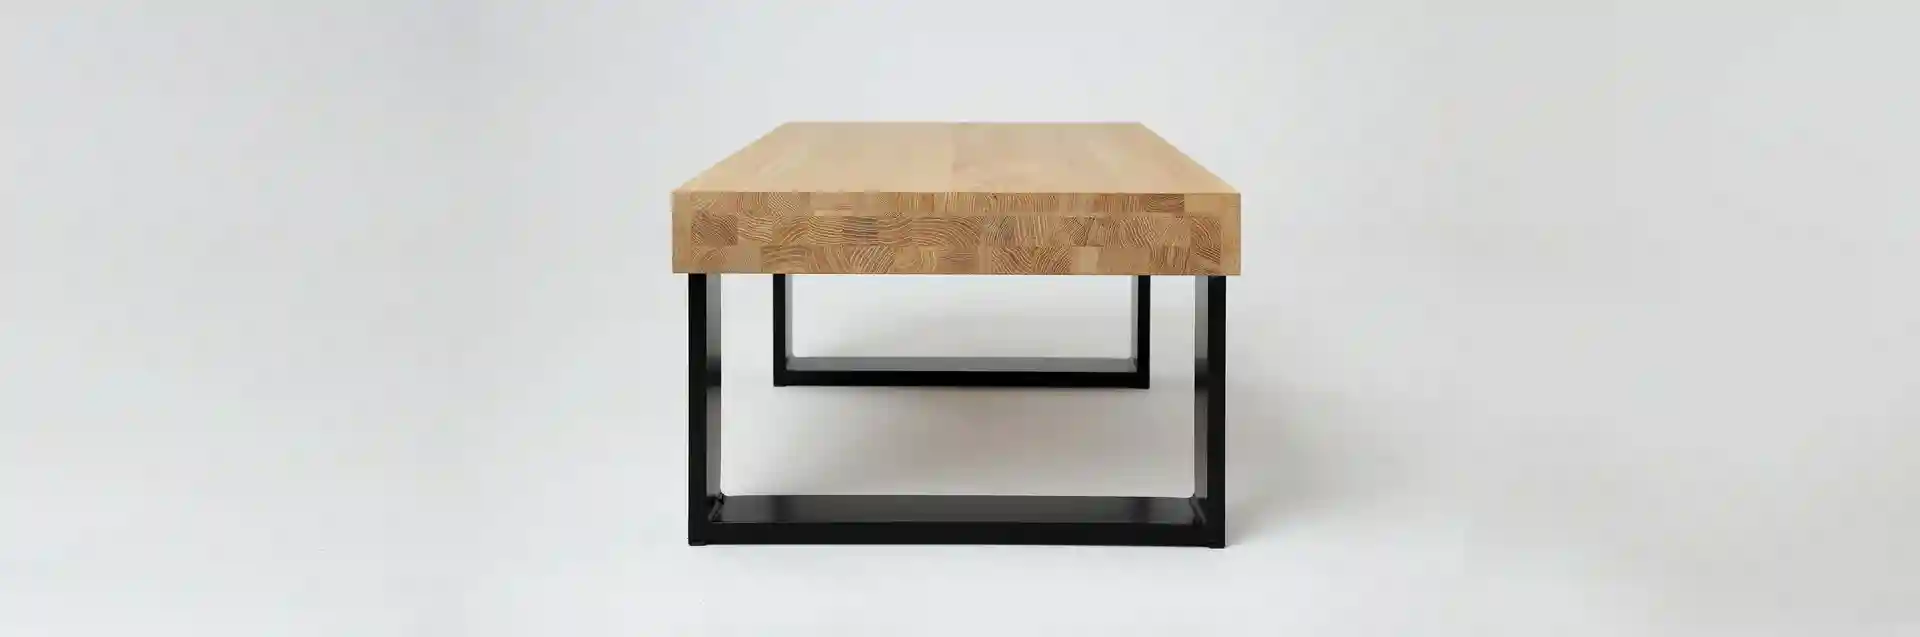 FRAME Small Table